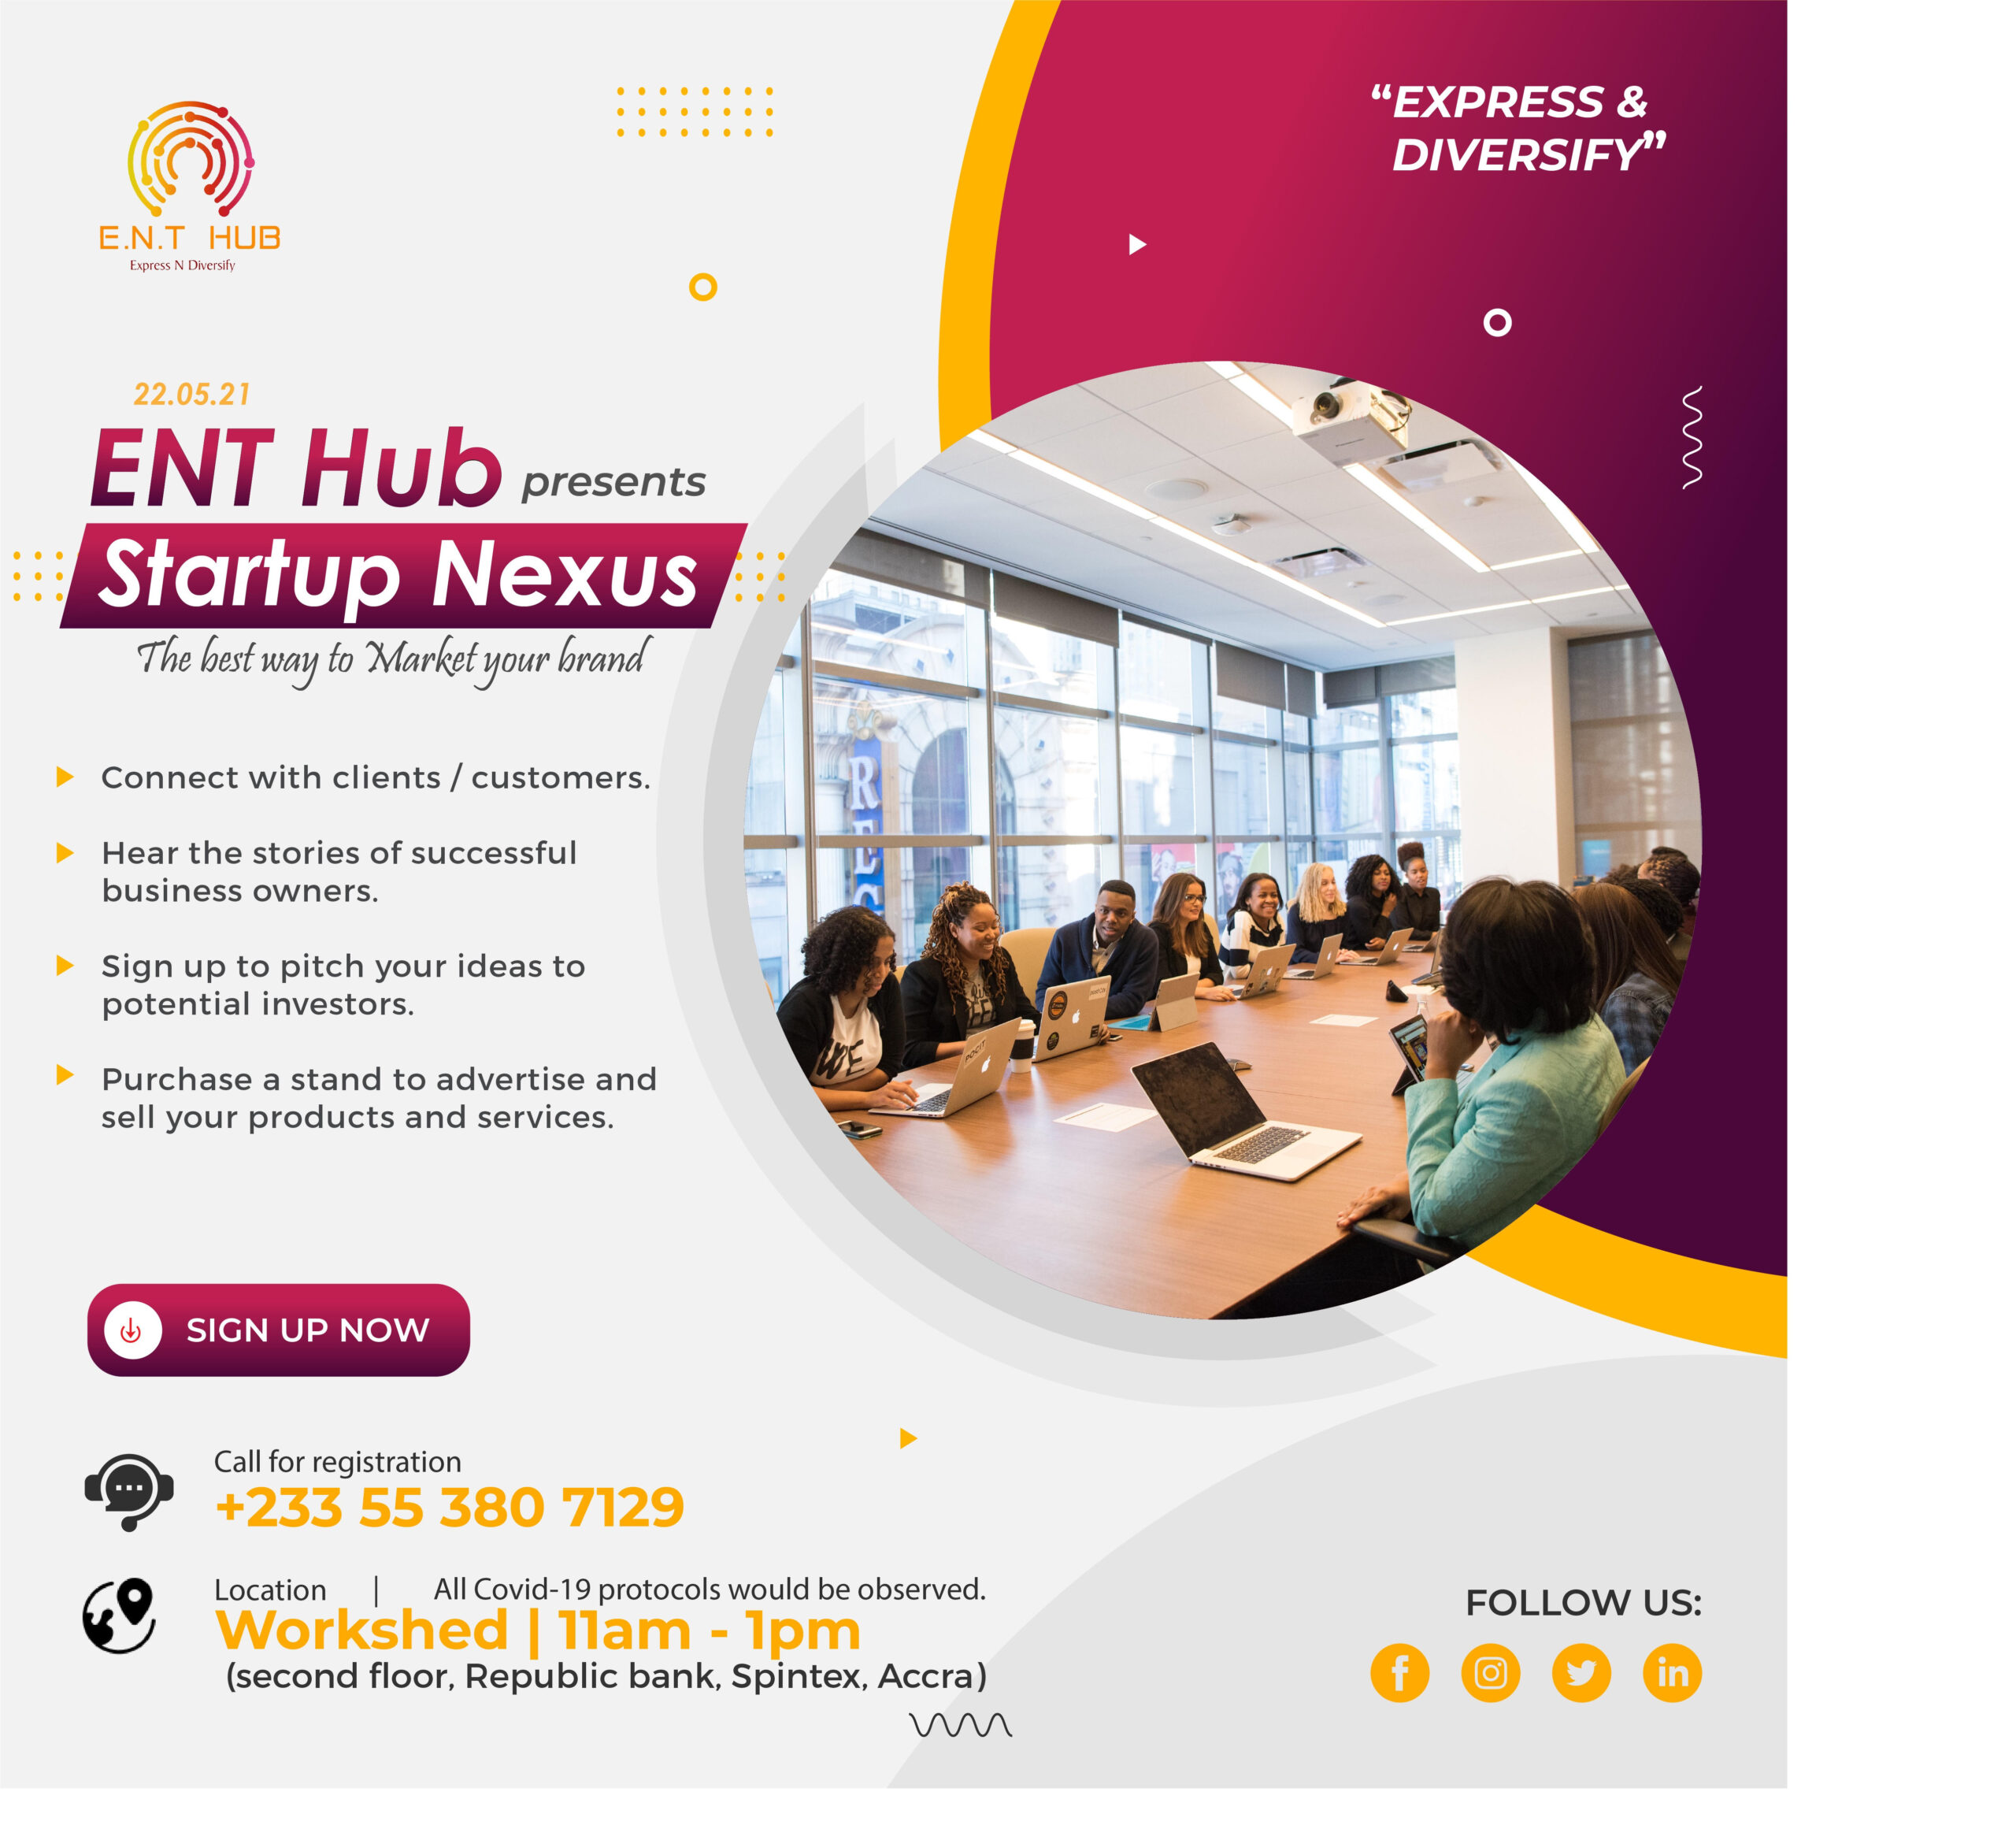 ENT Hub Startup Nexus by Alexis Laura Daniels aims to bolster connections this May